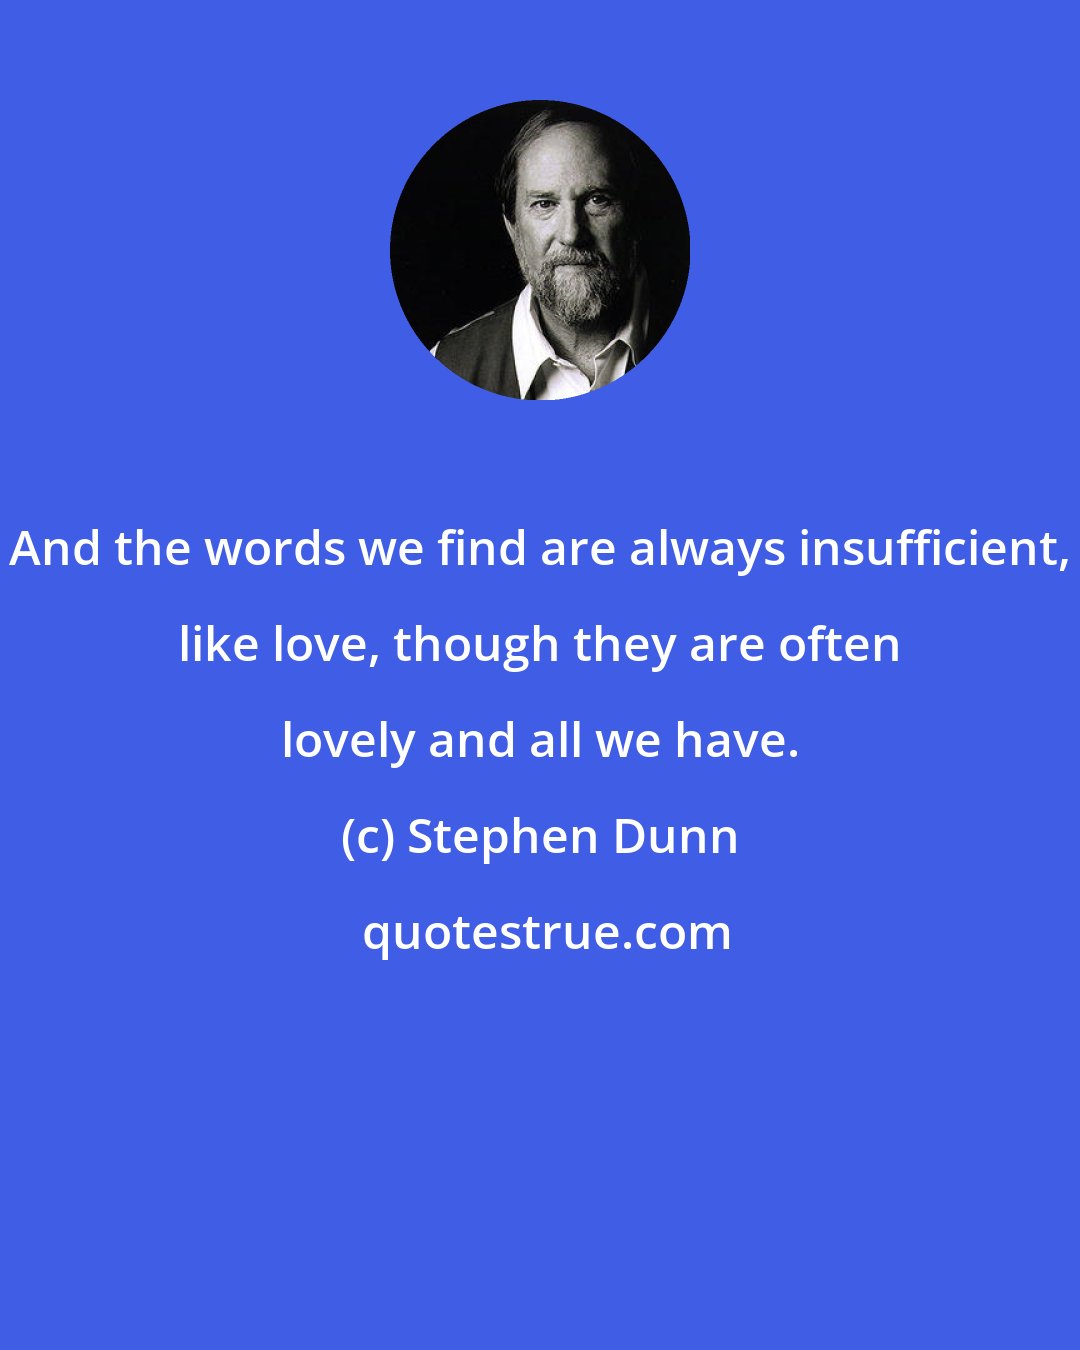 Stephen Dunn: And the words we find are always insufficient, like love, though they are often lovely and all we have.